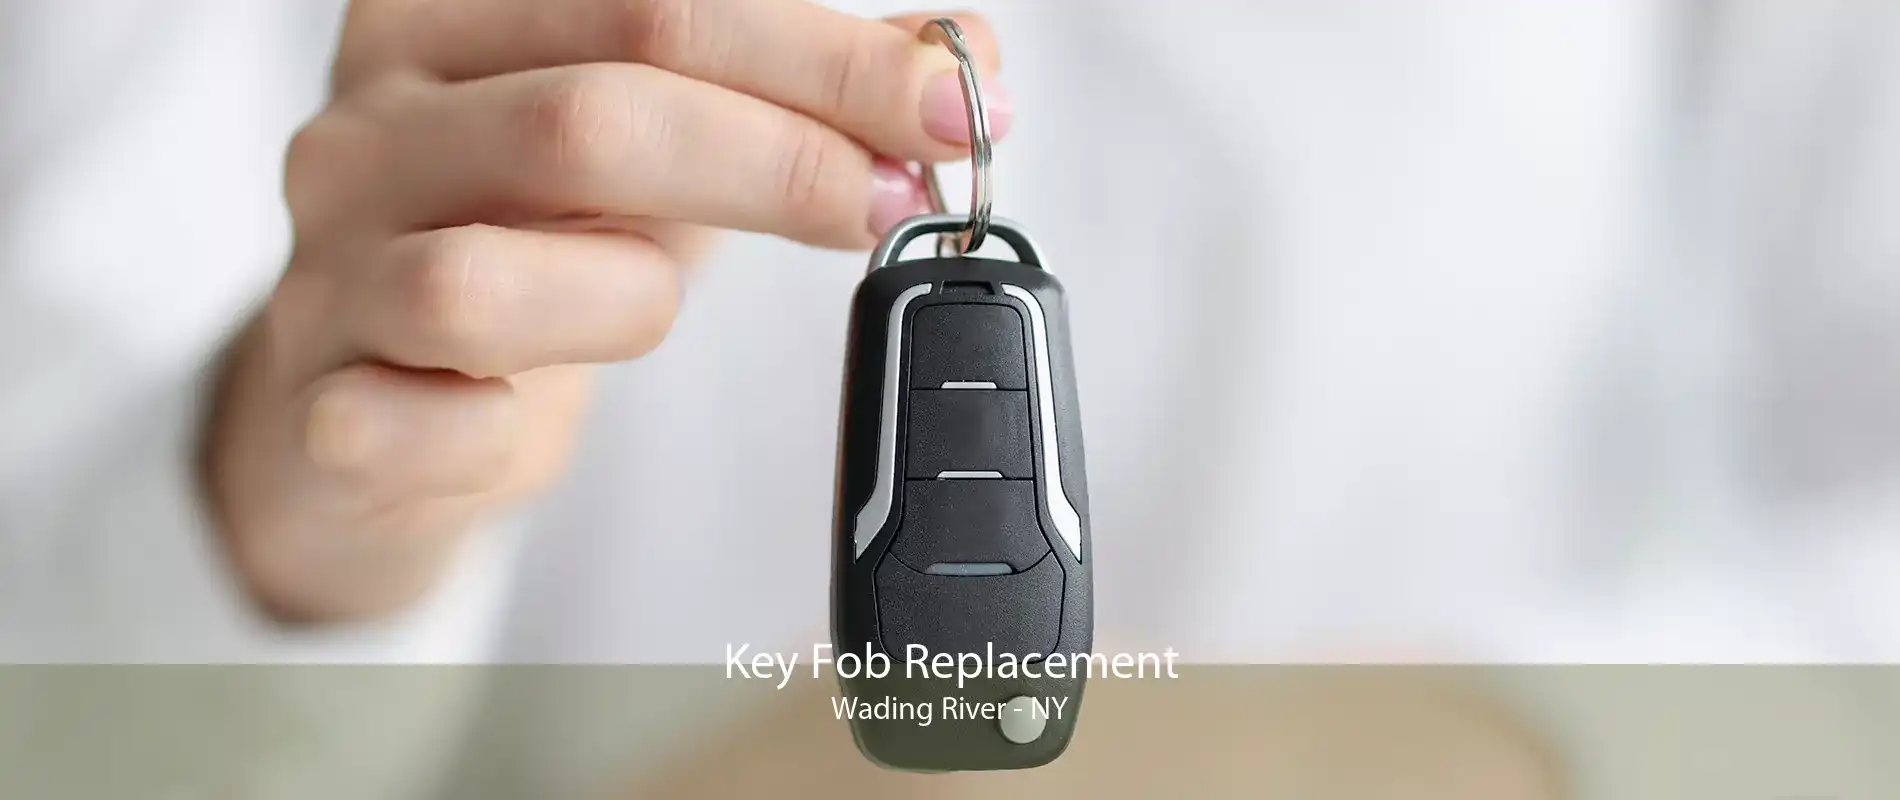 Key Fob Replacement Wading River - NY